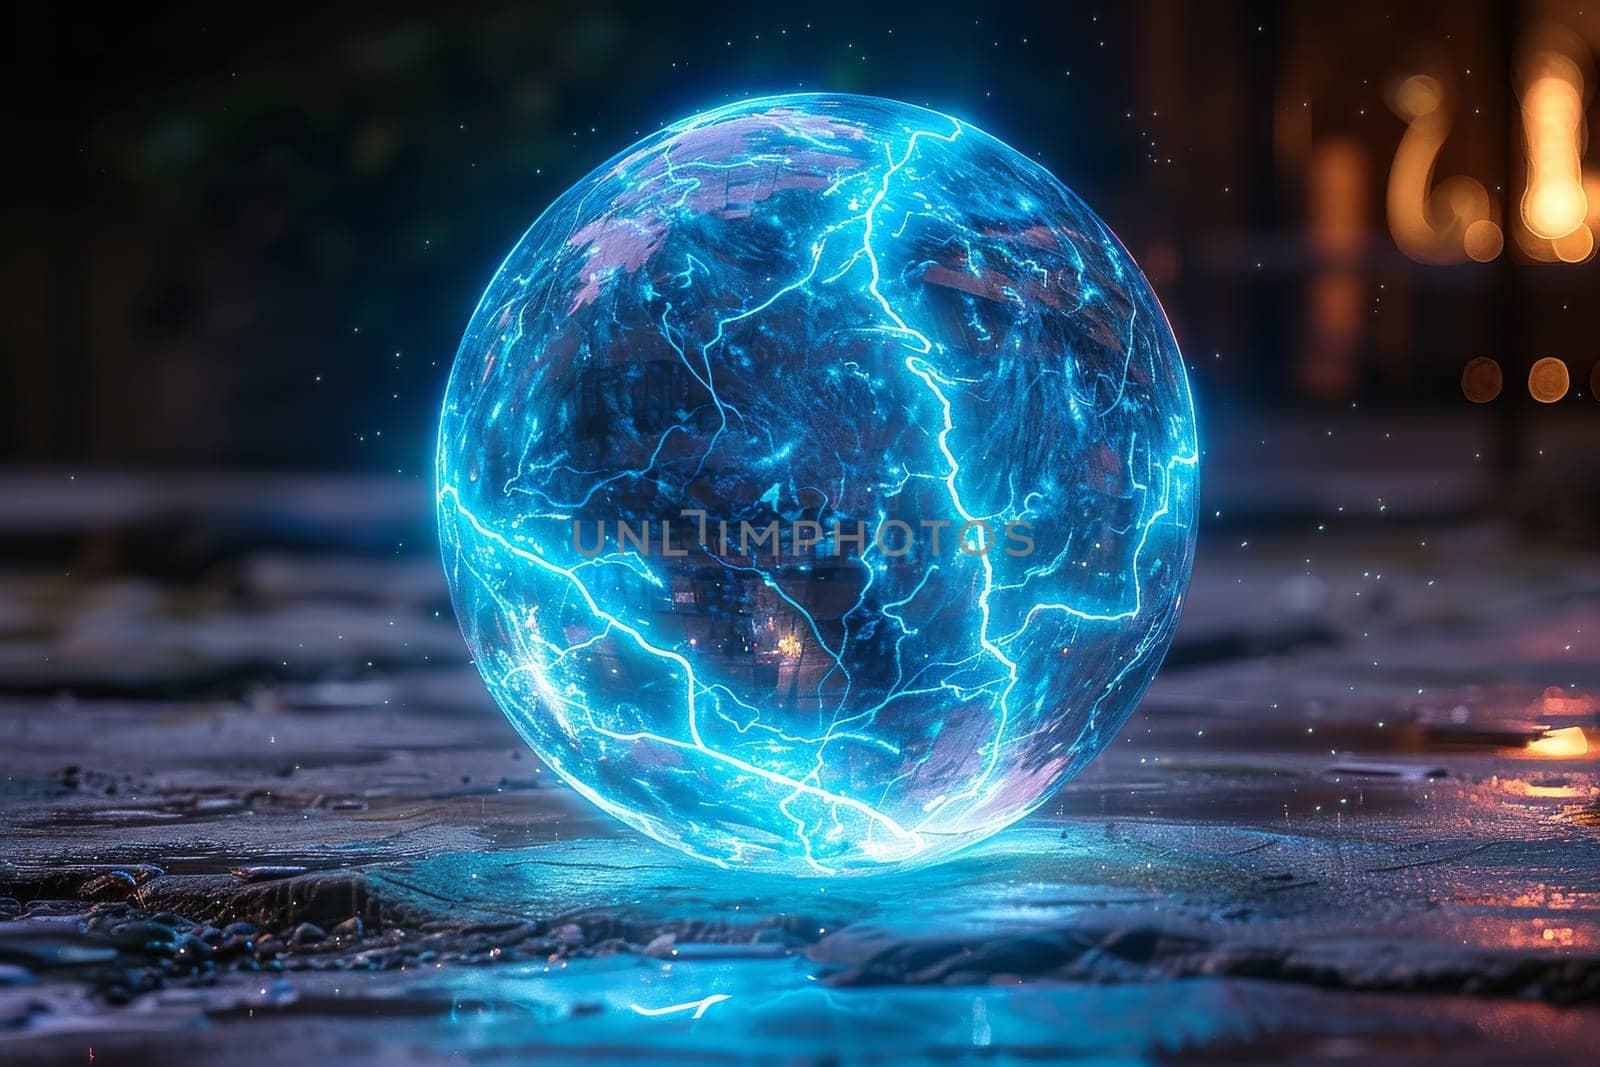 A blue and orange glowing ball with lightning bolts surrounding it by itchaznong